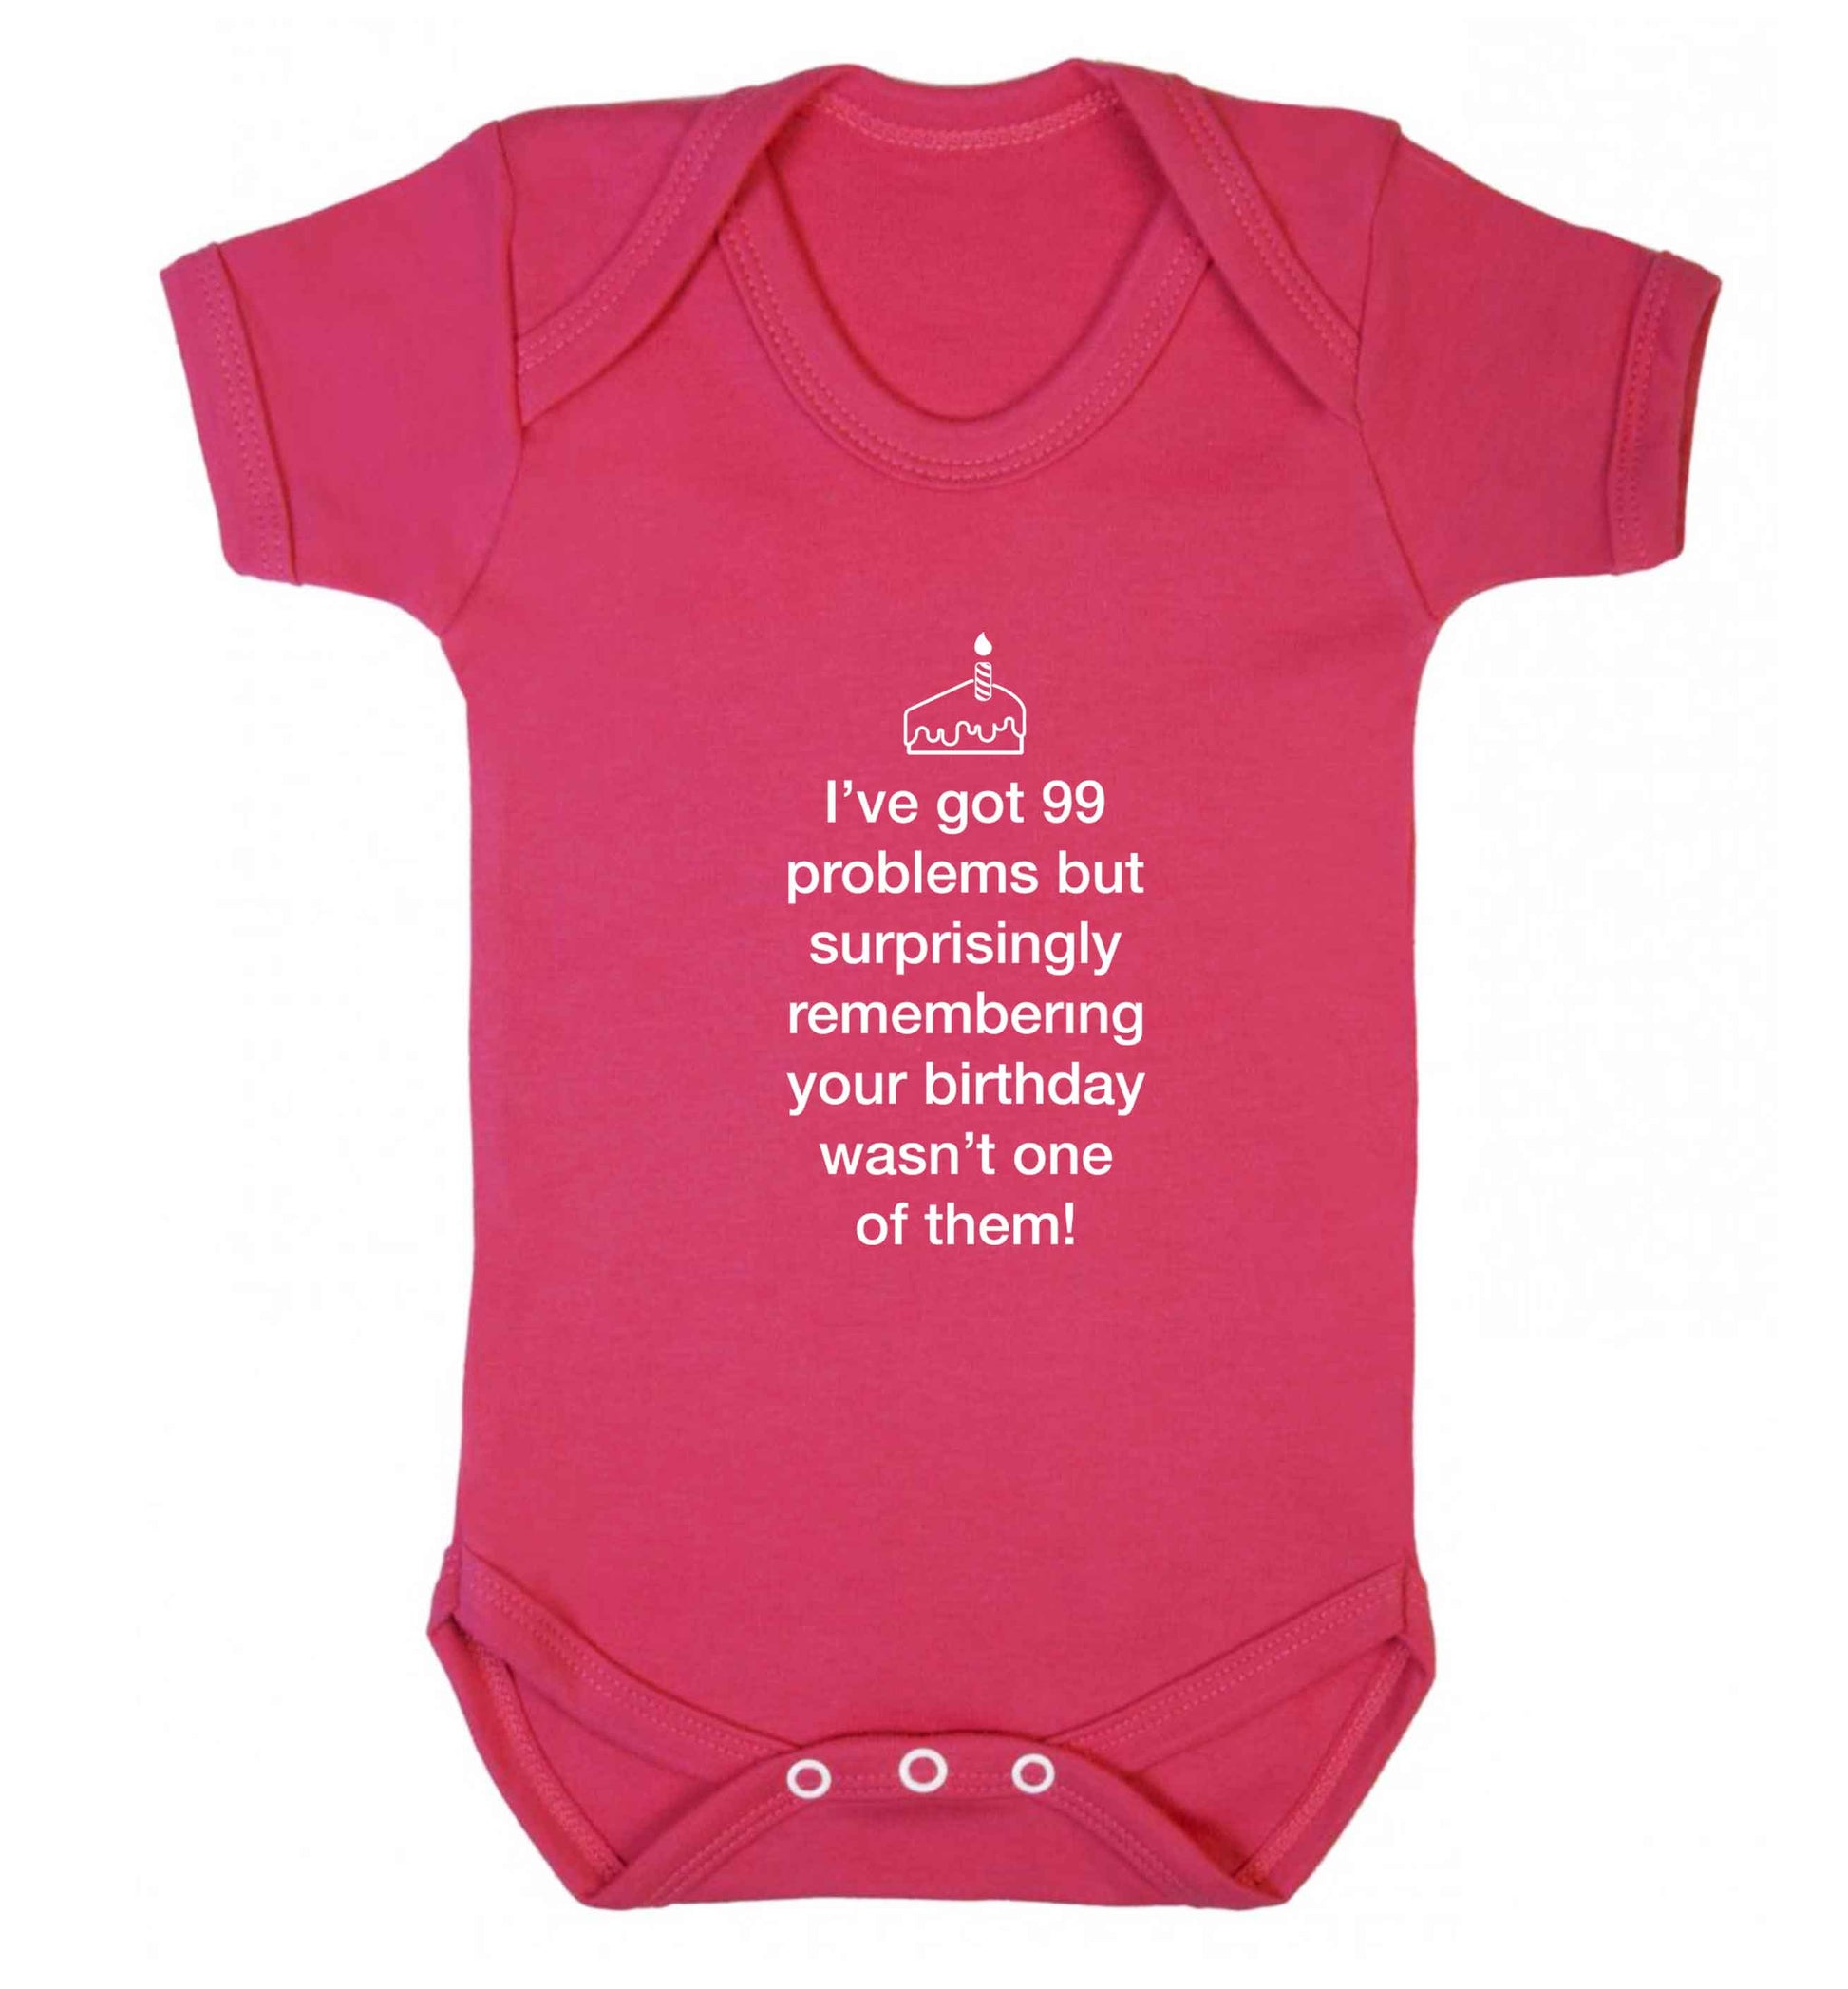 I've got 99 problems but surprisingly remembering your birthday wasn't one of them! baby vest dark pink 18-24 months